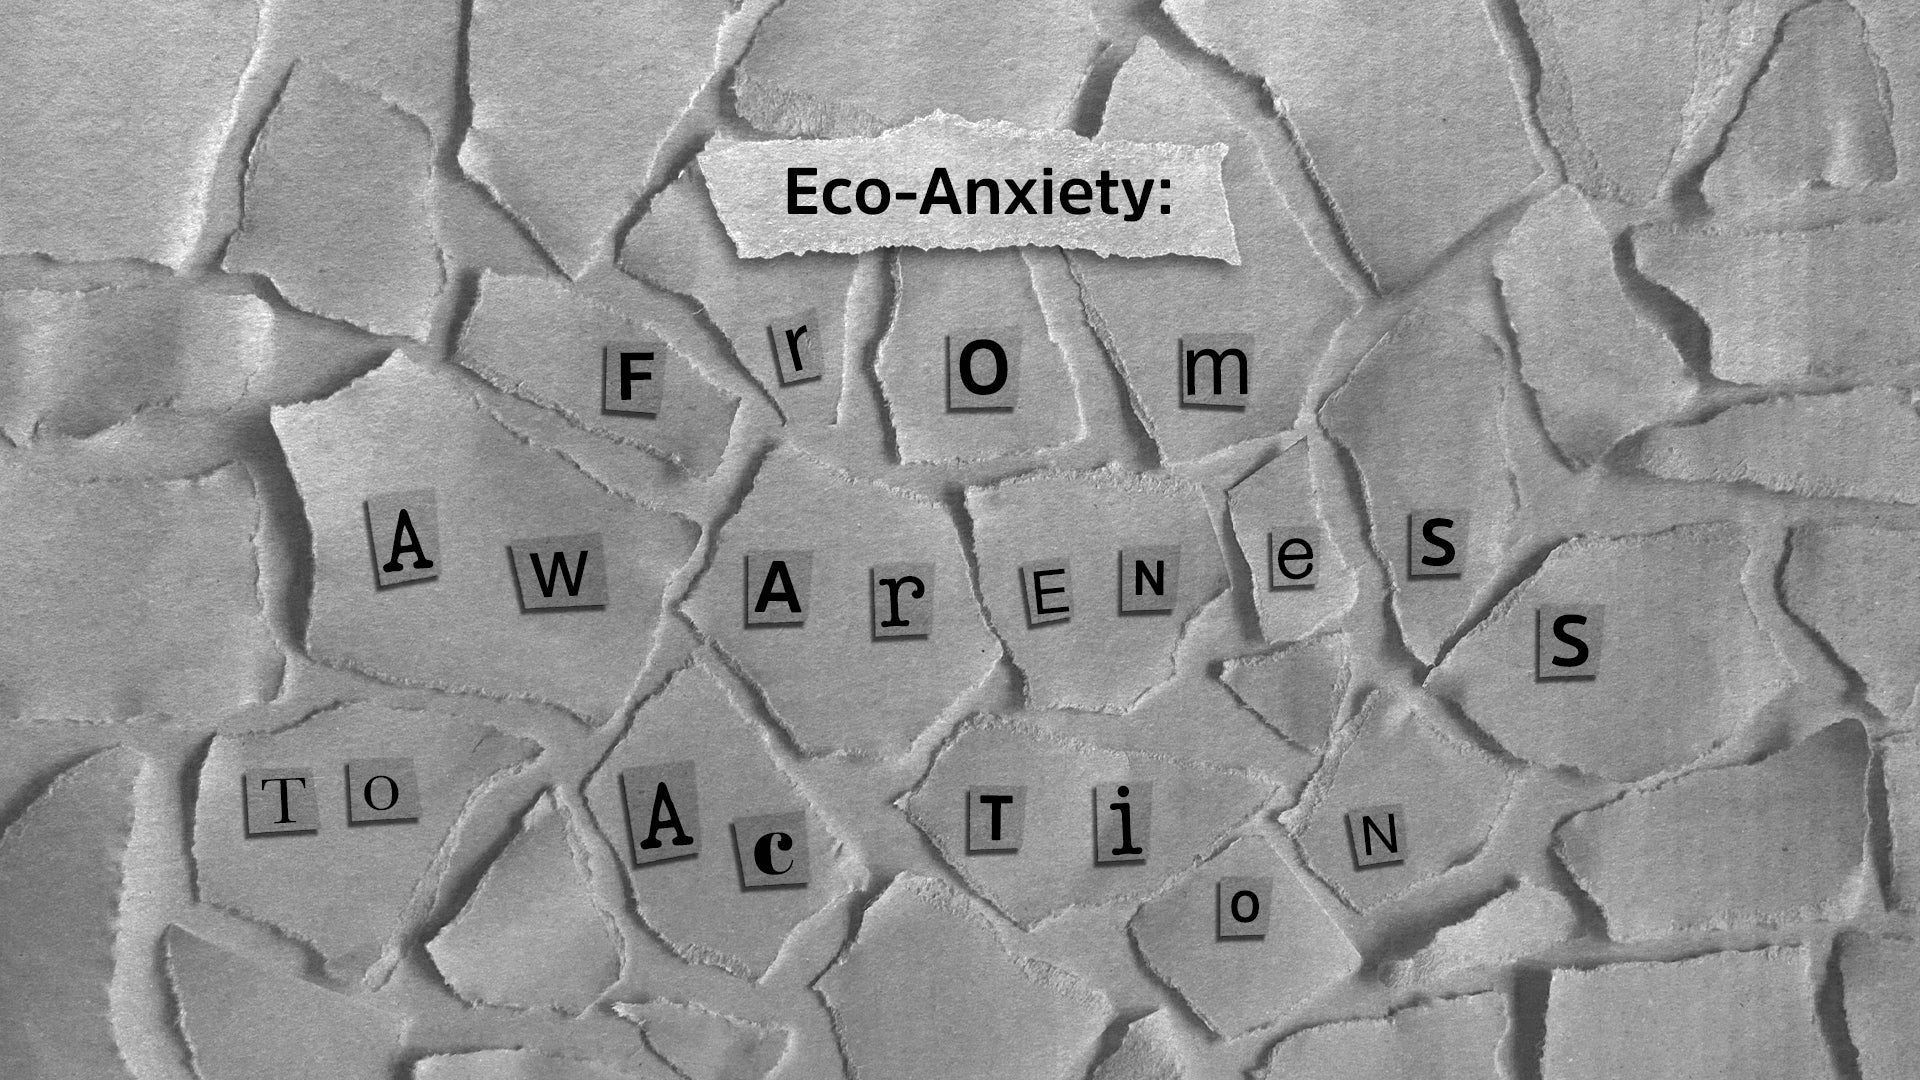 ECO-ANXIETY: FROM AWARENESS TO ACTION - prev